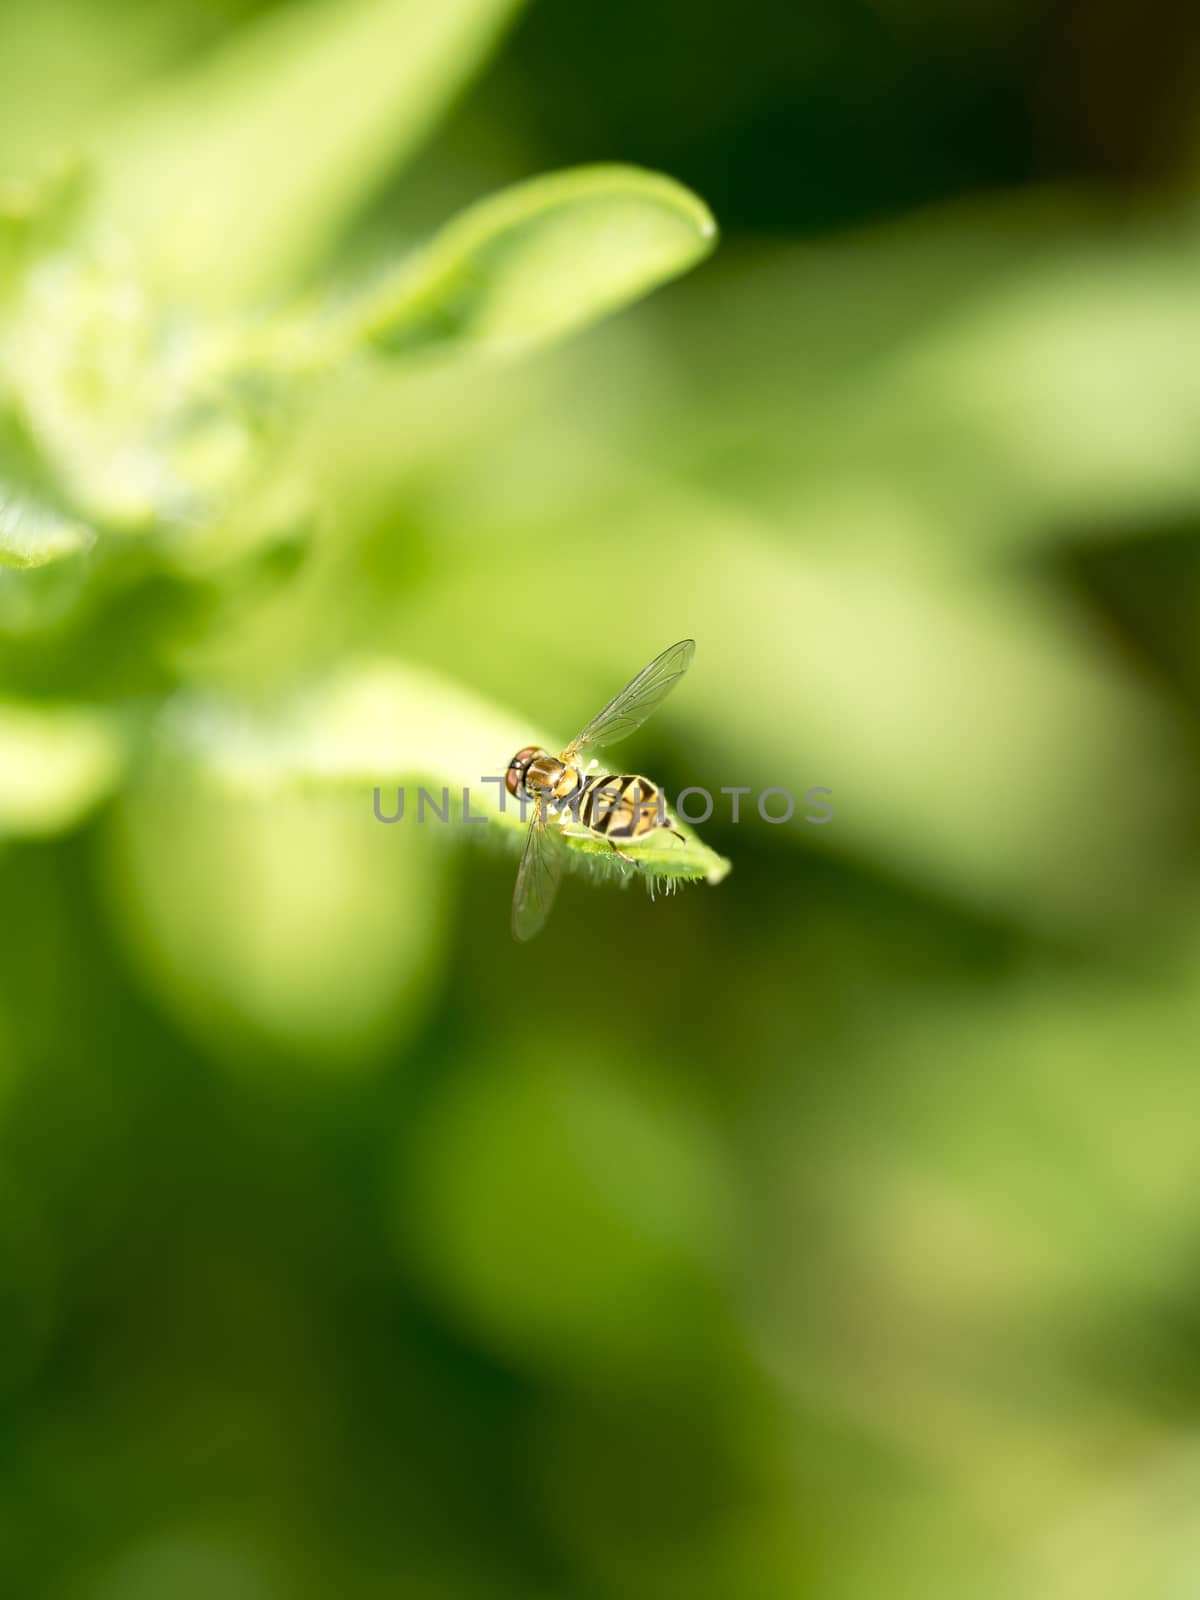 Small Fly by leieng